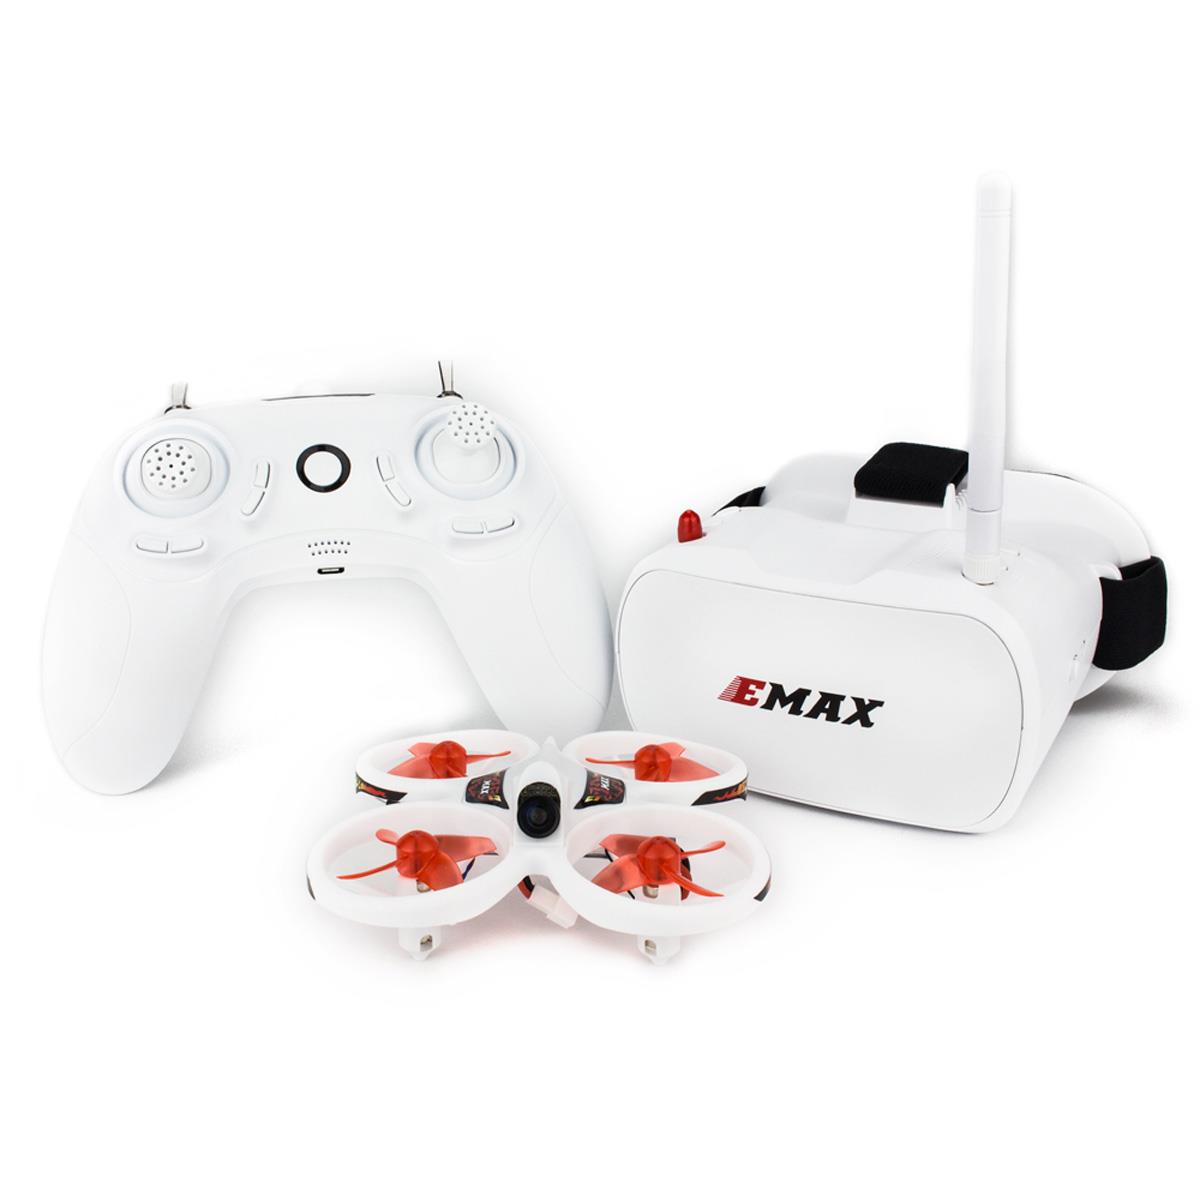 Image of Emax EMAX EZ Pilot RTF Indoor Beginner FPV Drone Kit with Controller and Goggles